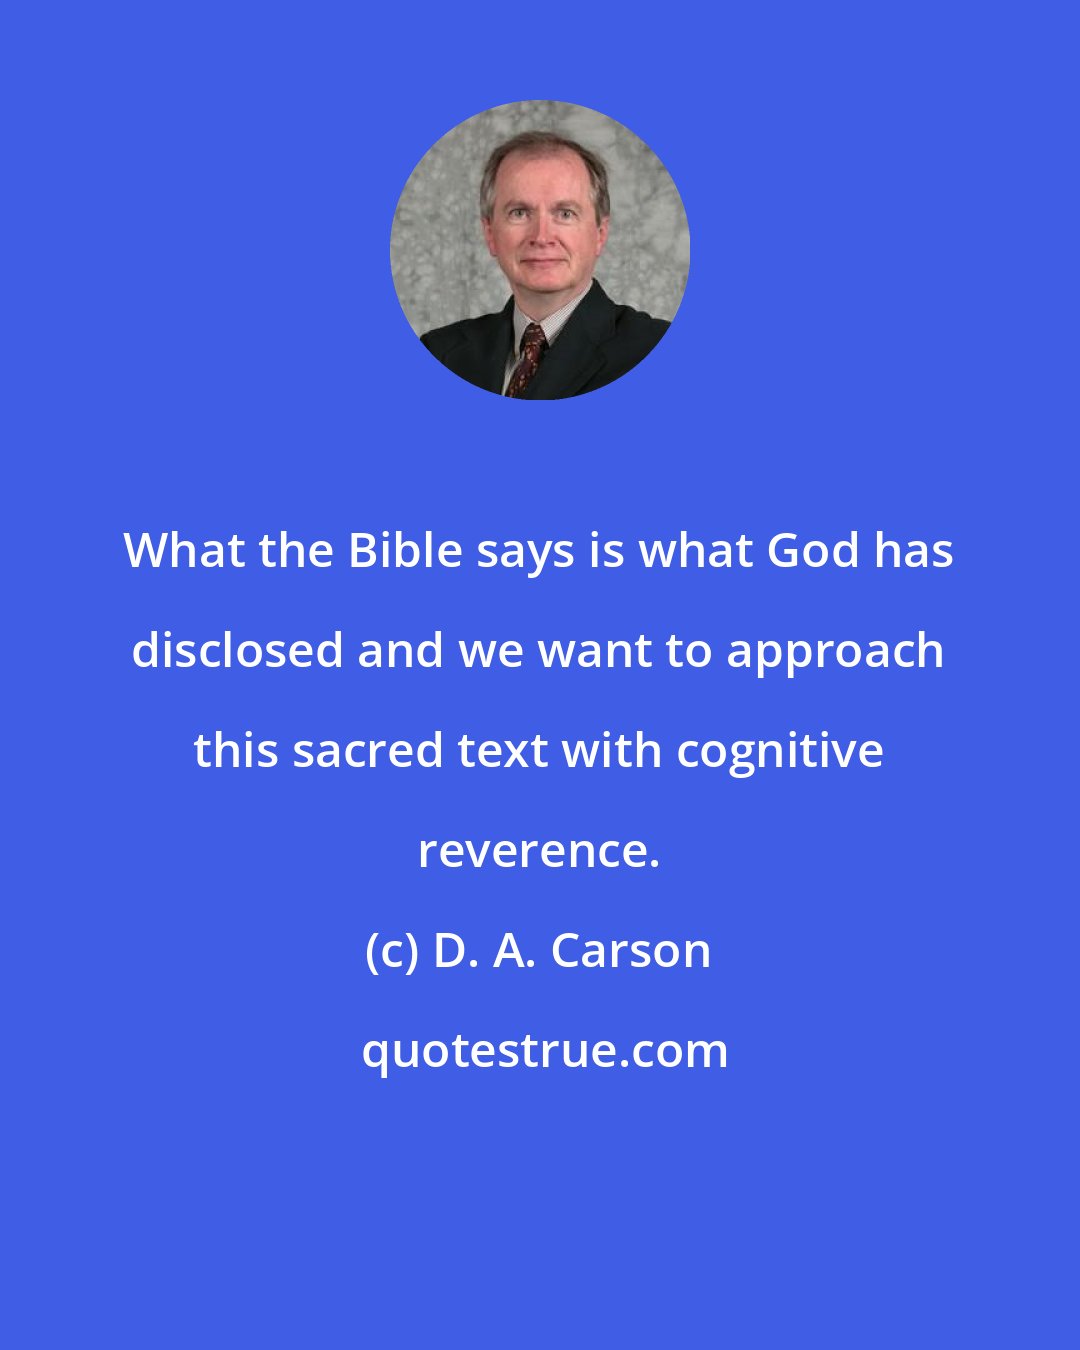 D. A. Carson: What the Bible says is what God has disclosed and we want to approach this sacred text with cognitive reverence.